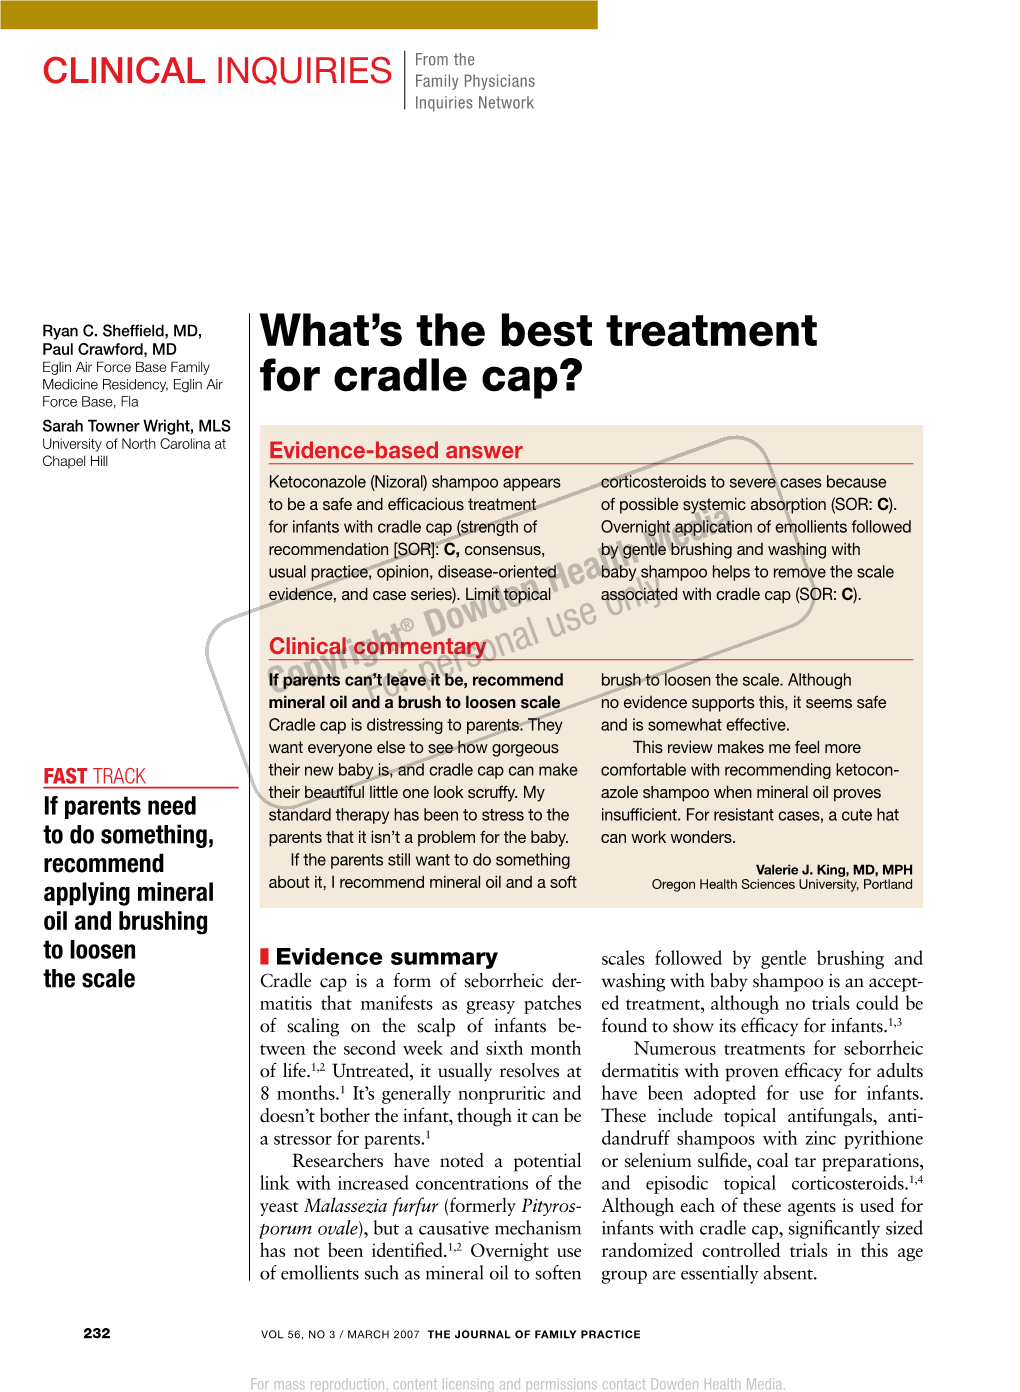 What's the Best Treatment for Cradle Cap?